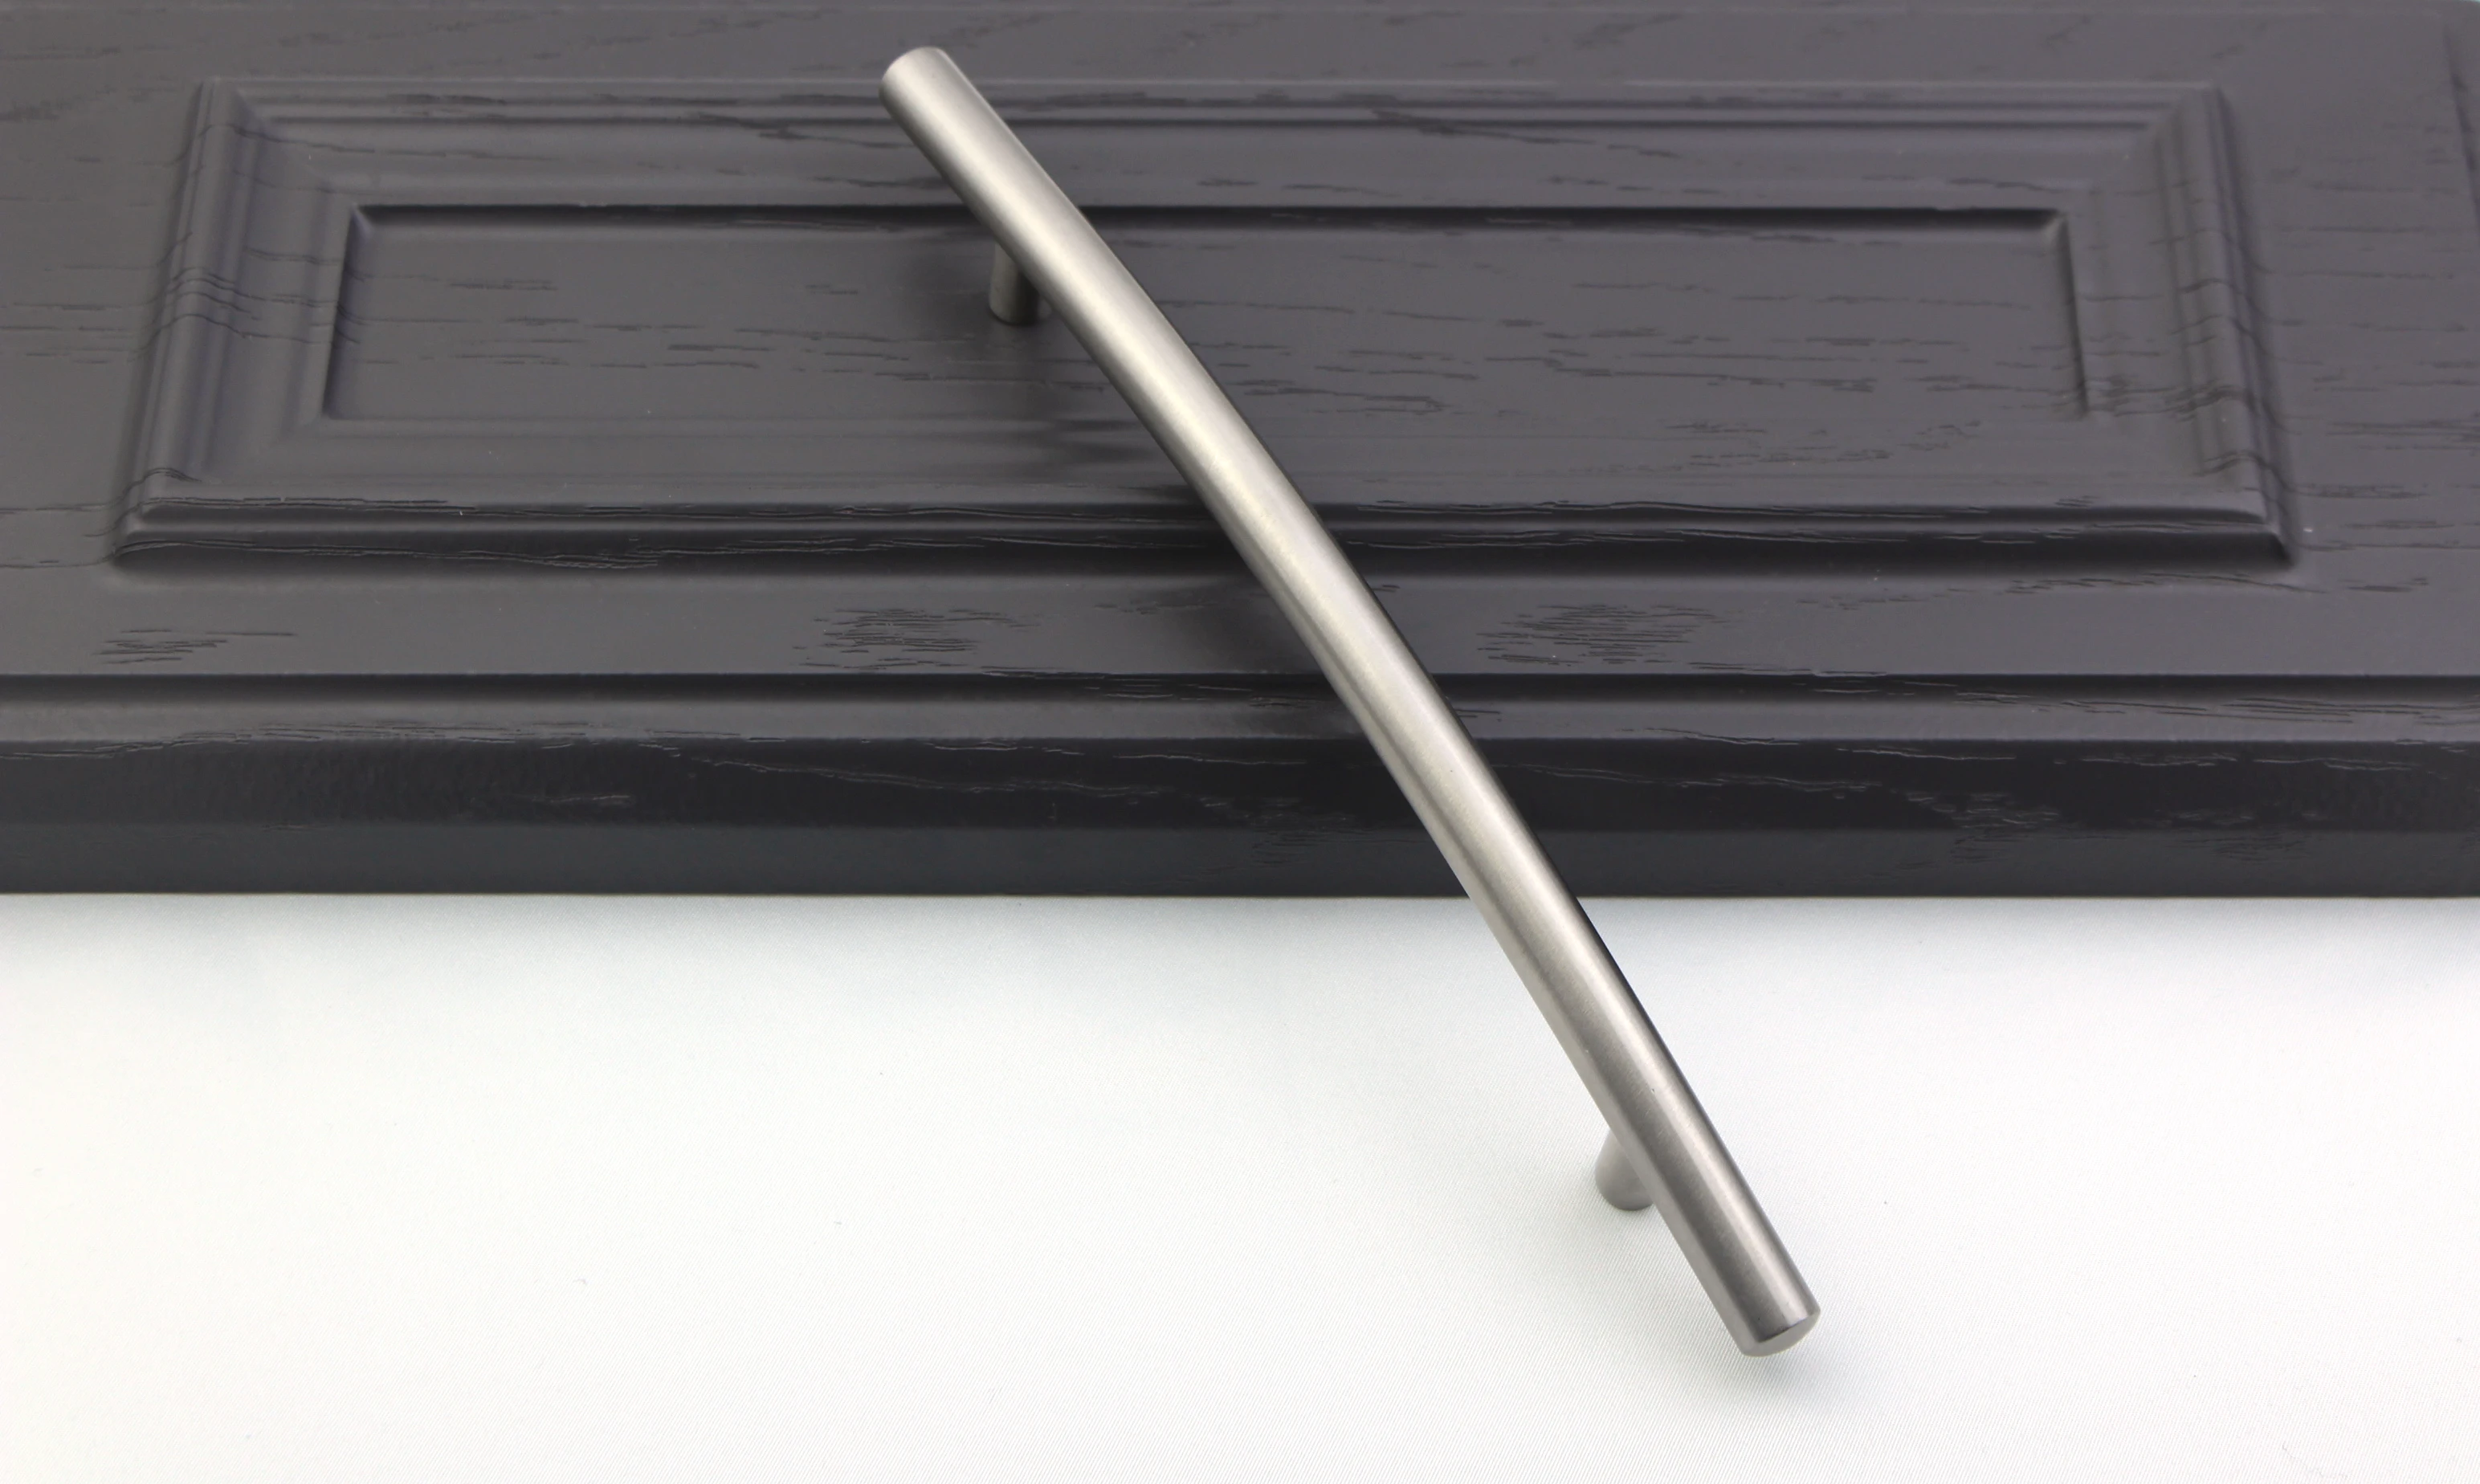 Popular high quality stainless steel material handles for kitchen cabinet